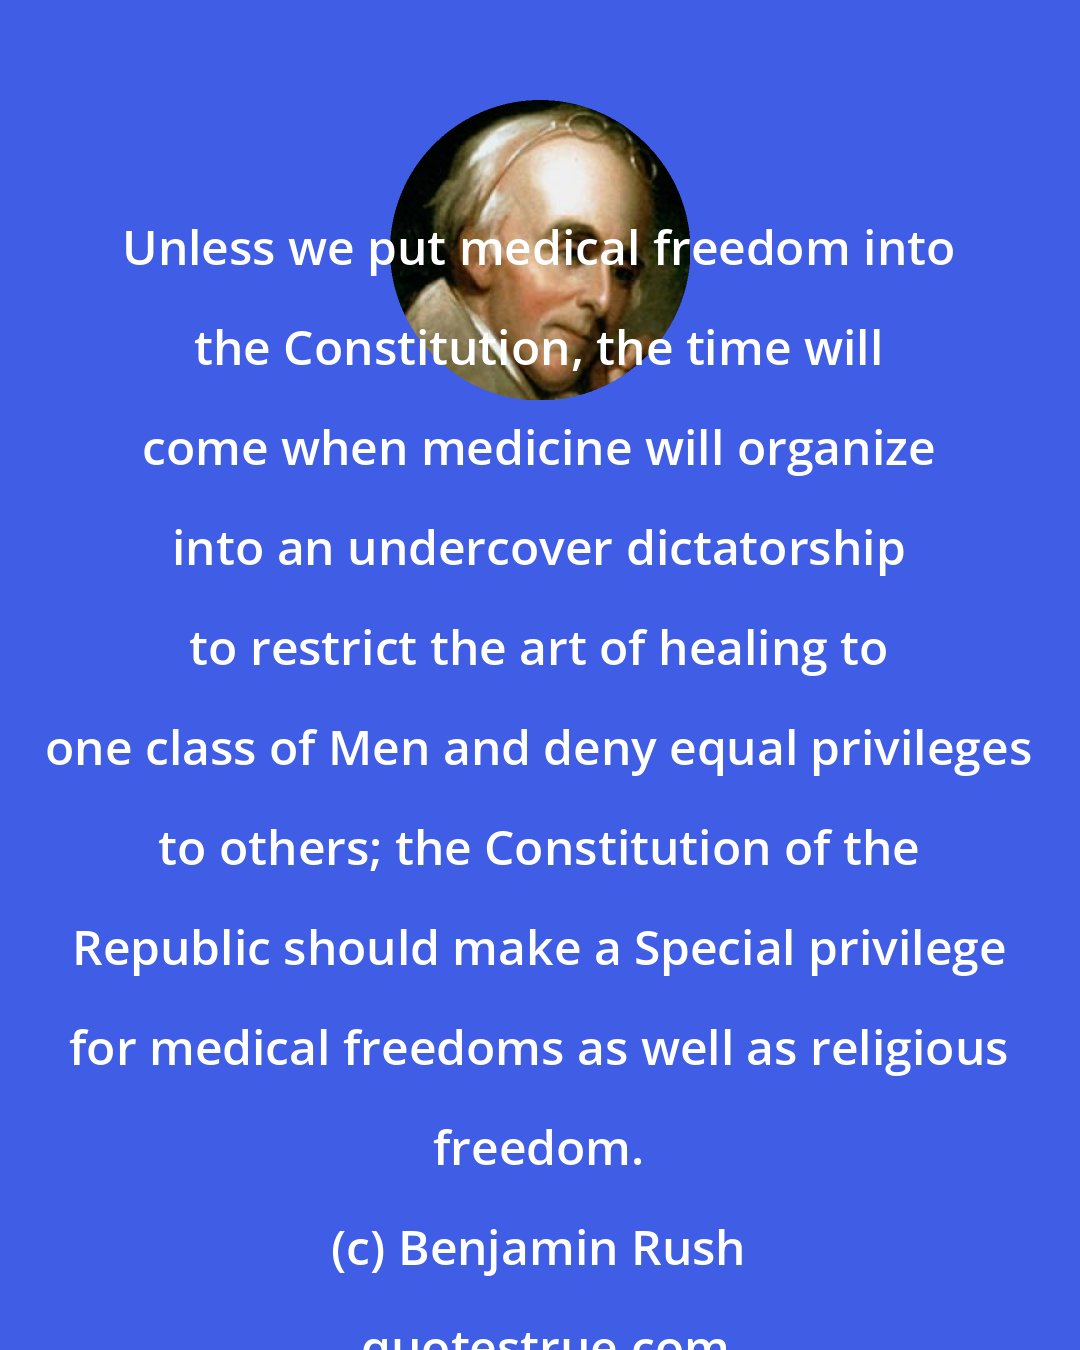 Benjamin Rush: Unless we put medical freedom into the Constitution, the time will come when medicine will organize into an undercover dictatorship to restrict the art of healing to one class of Men and deny equal privileges to others; the Constitution of the Republic should make a Special privilege for medical freedoms as well as religious freedom.